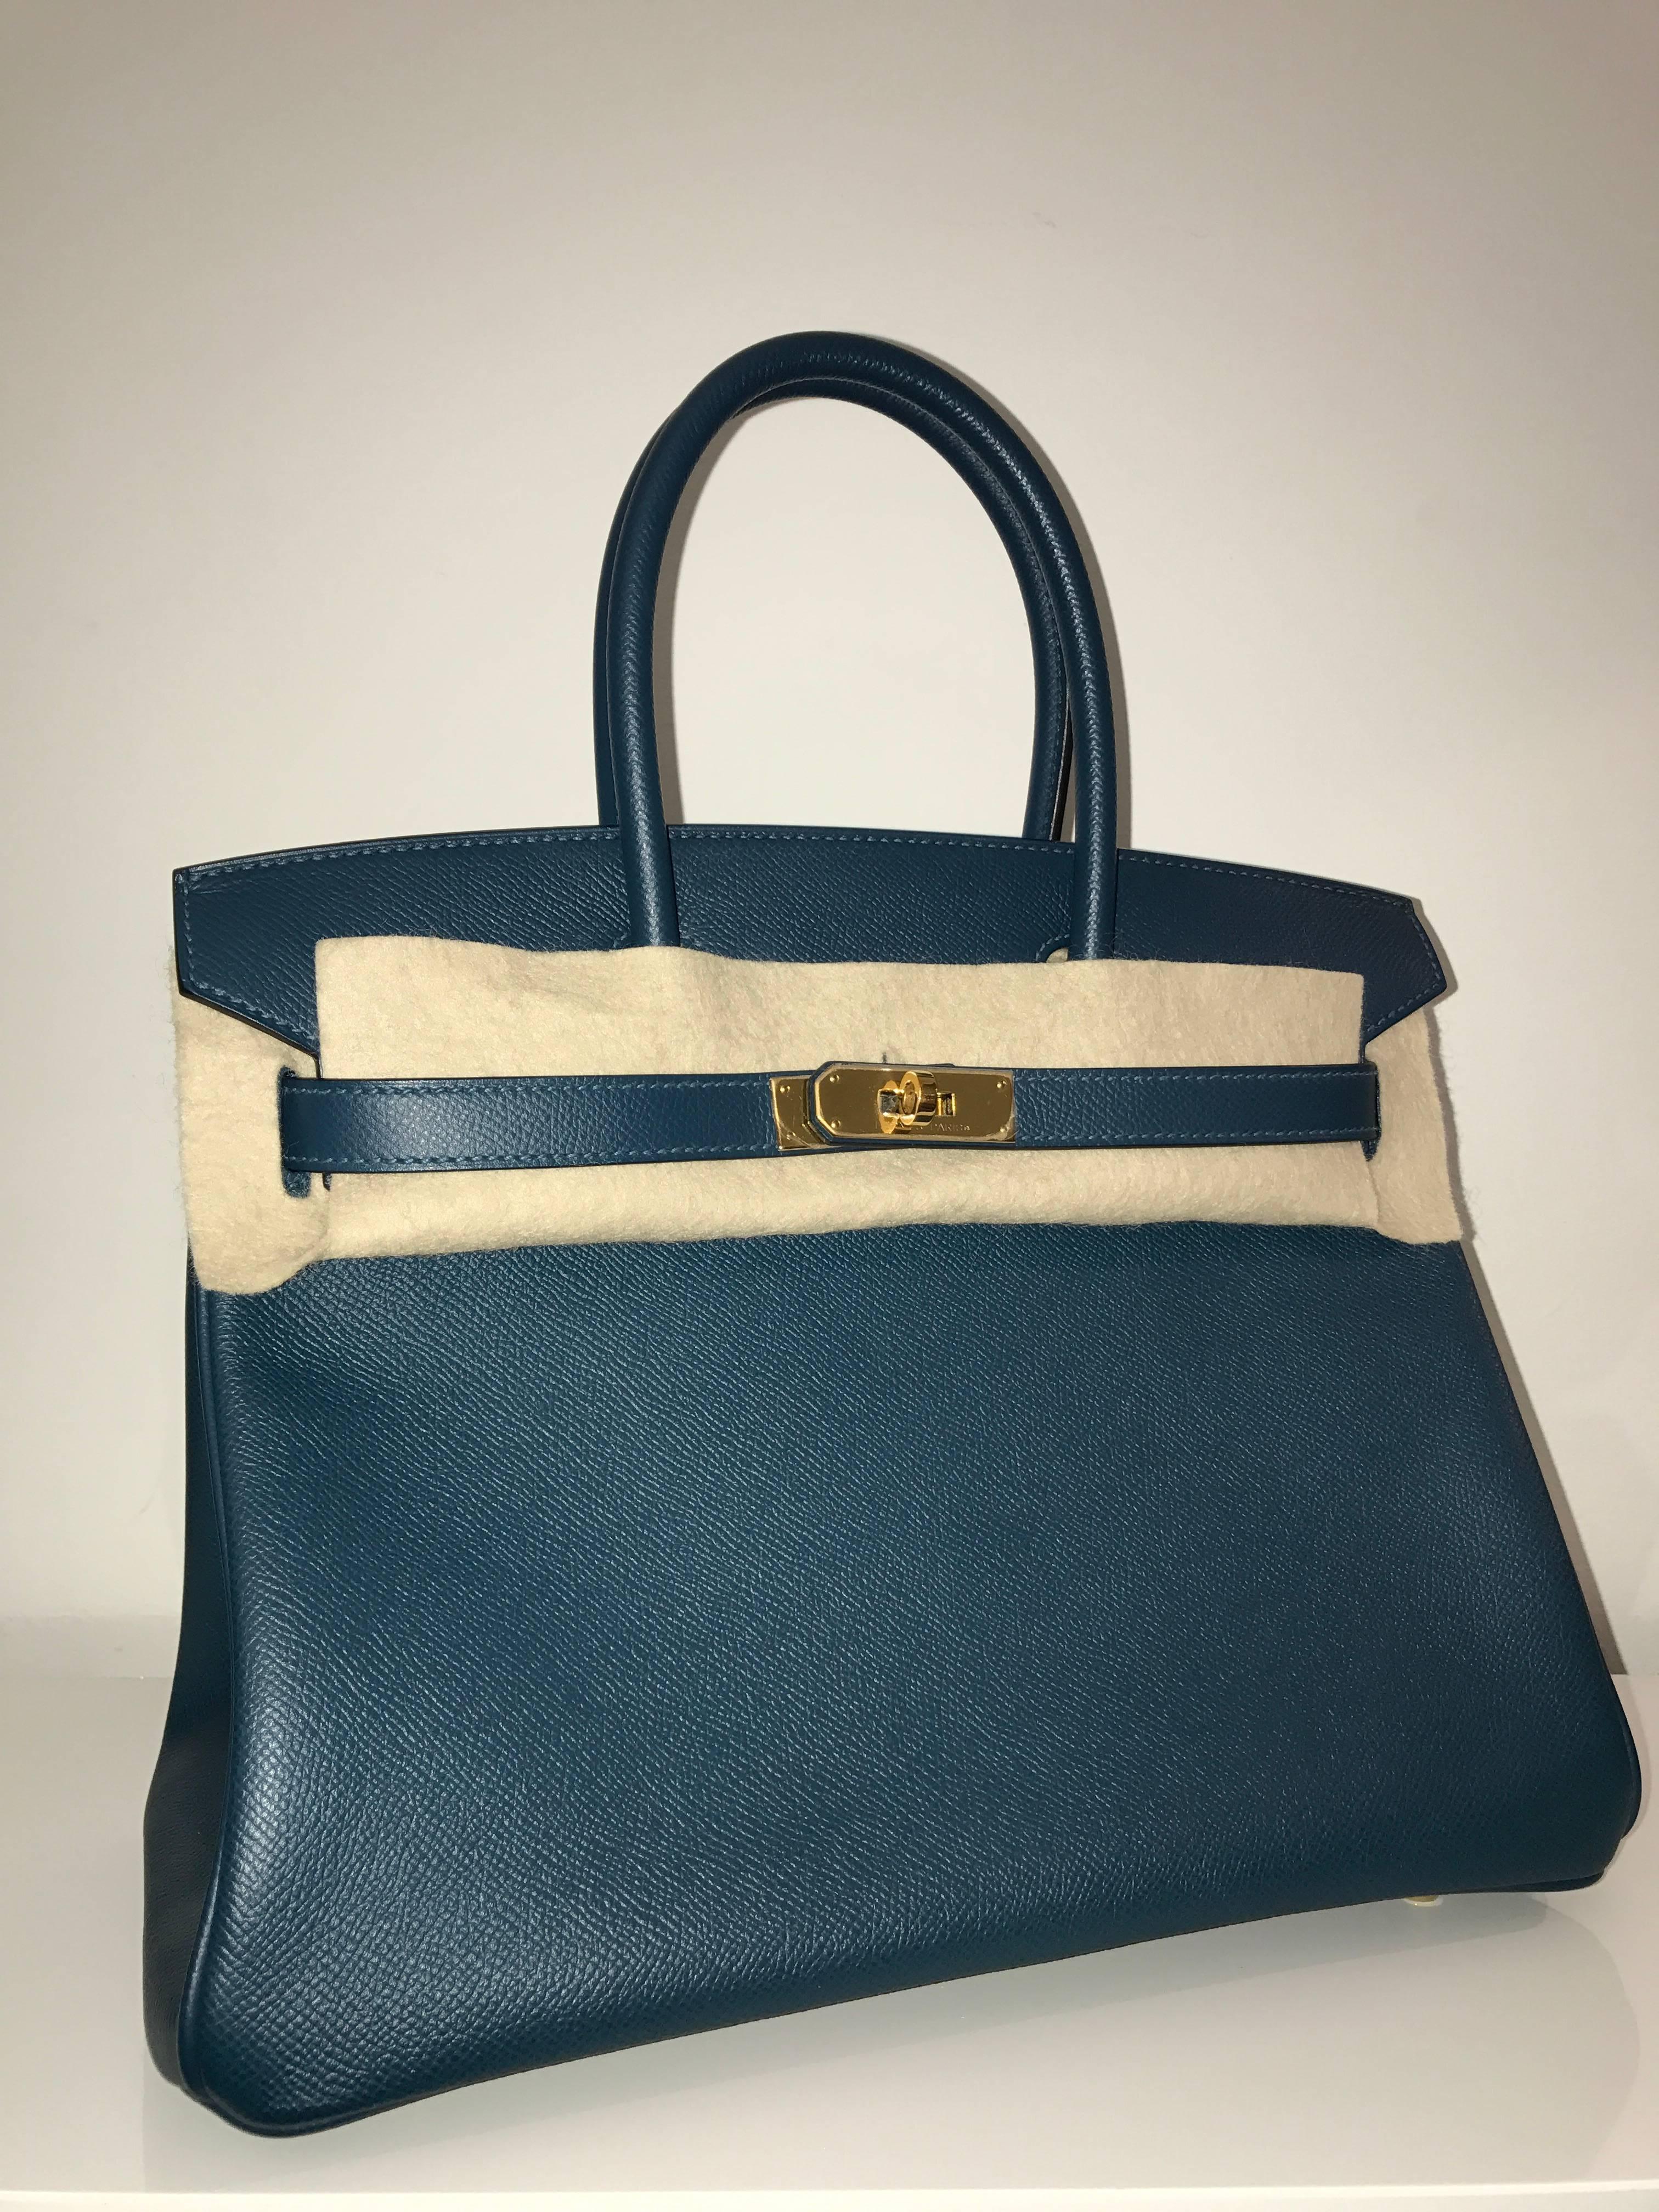 Hermes 
Birkin Size 30
Epsom Leather 
Colour Colvert 
Gold Hardware
Store fresh, comes with receipt and full set (dust bag, box...) 
Hydeparkfashion specializes in sourcing and delivering authentic luxury handbags, mainly Hermes, to clients around